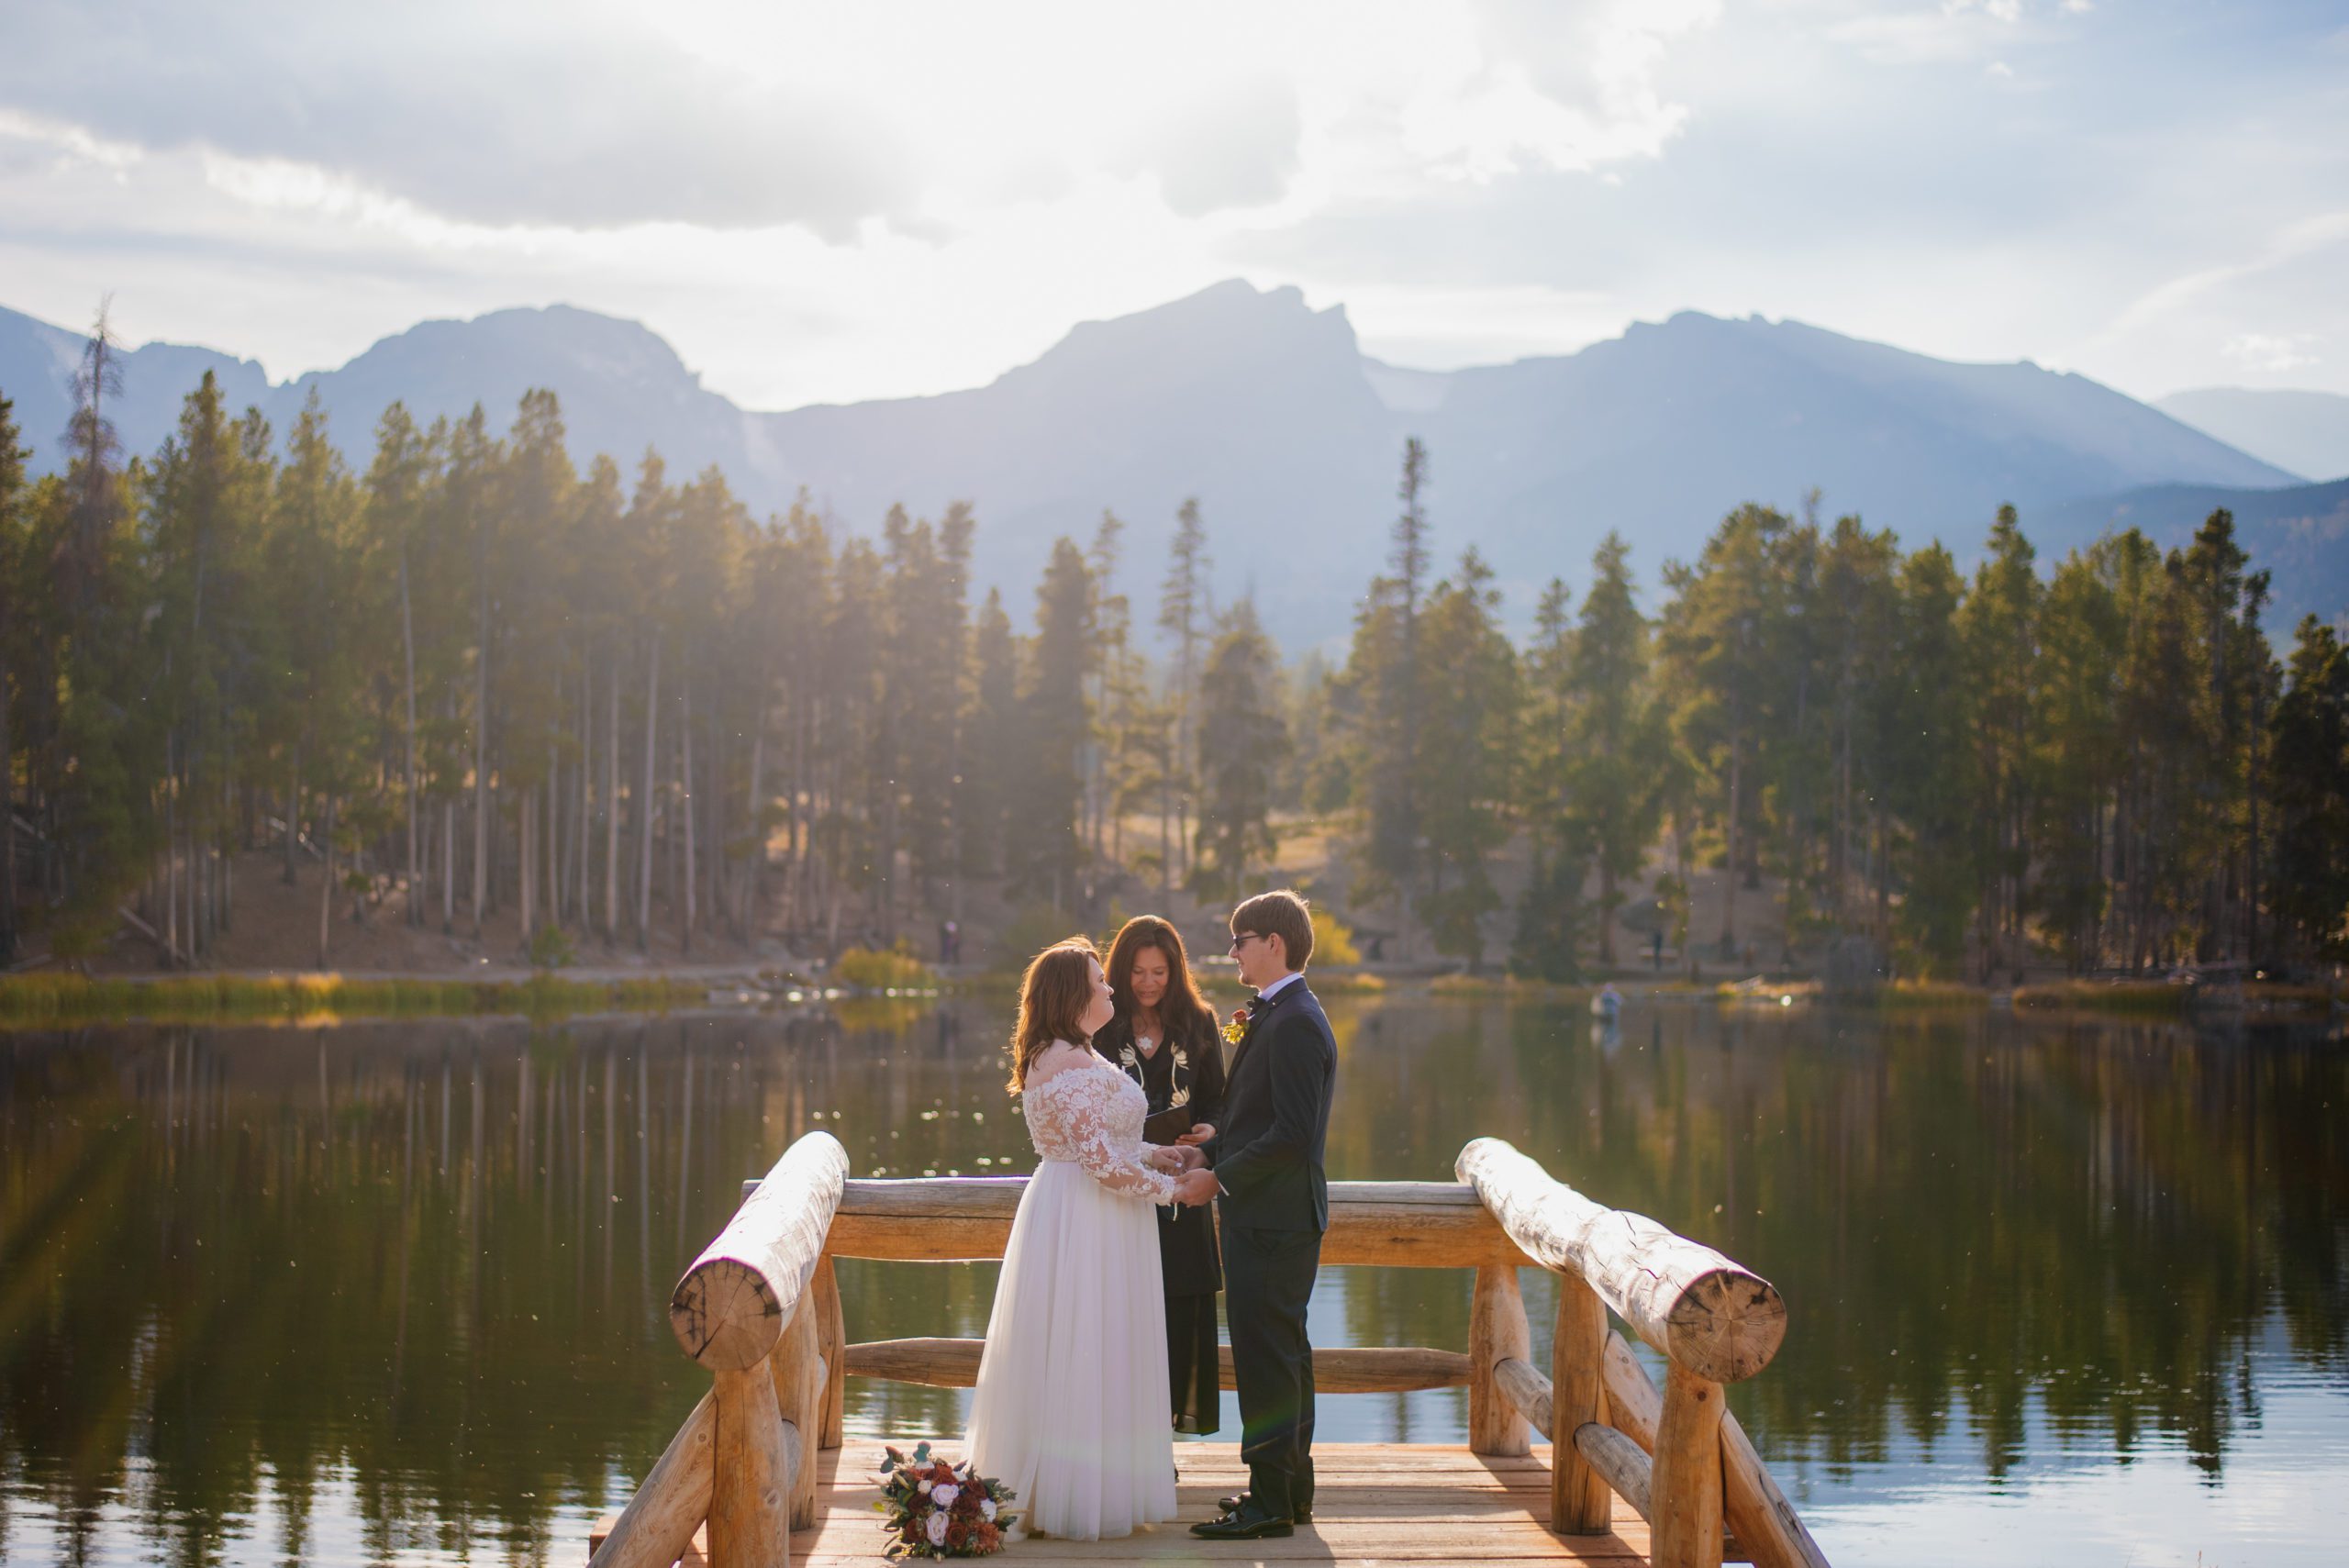 Bride and groom look lovingly at each other holding hands on the lake
at Sprague Lake - RMNP